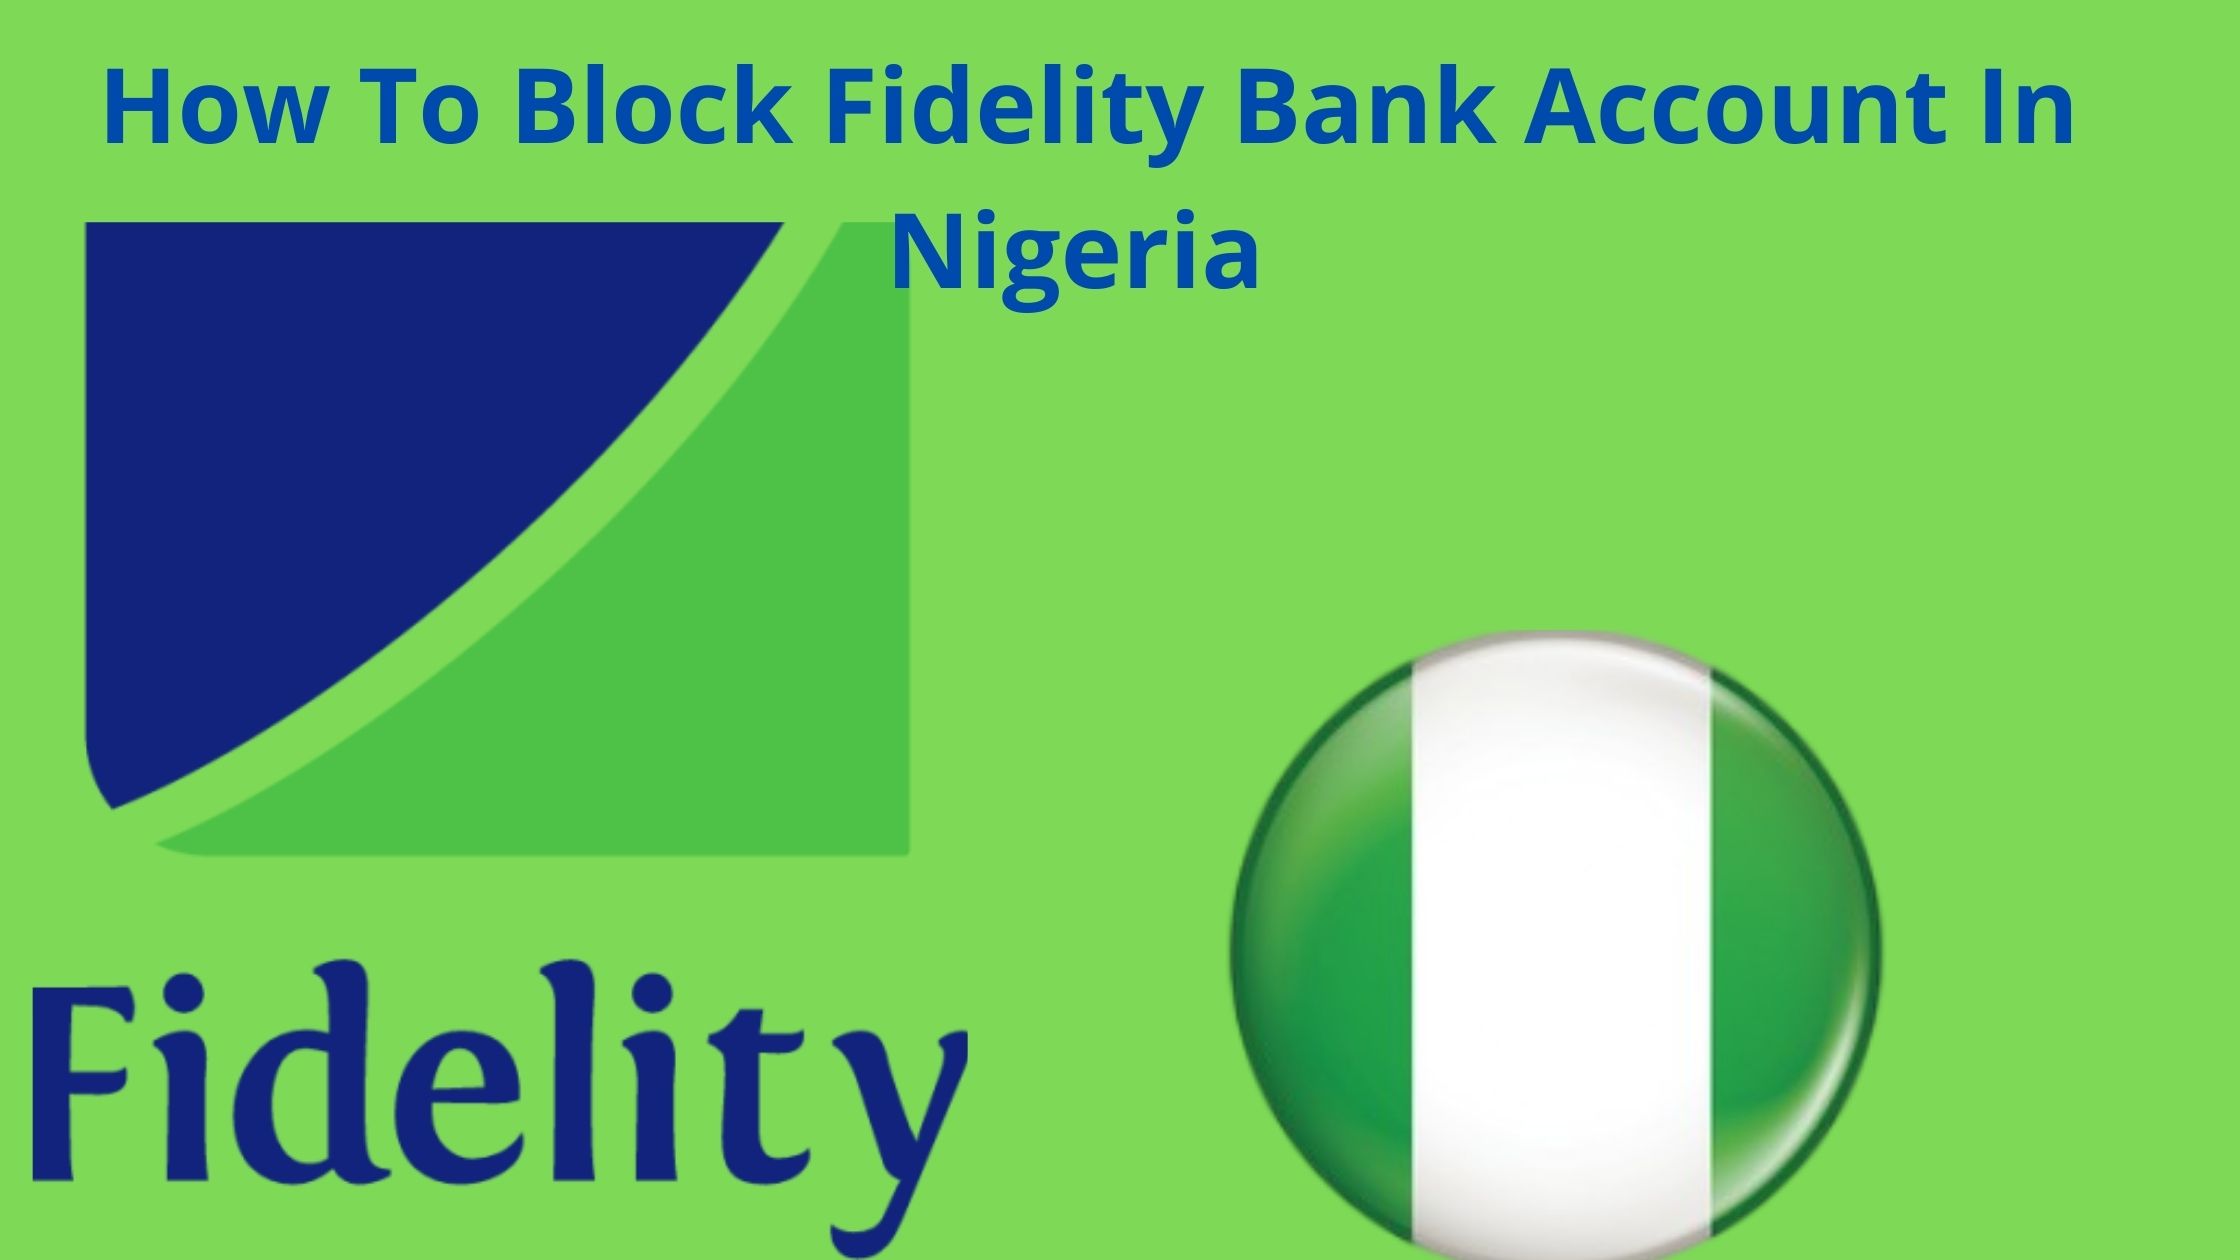 How To Block Fidelity Bank Account In Nigeria